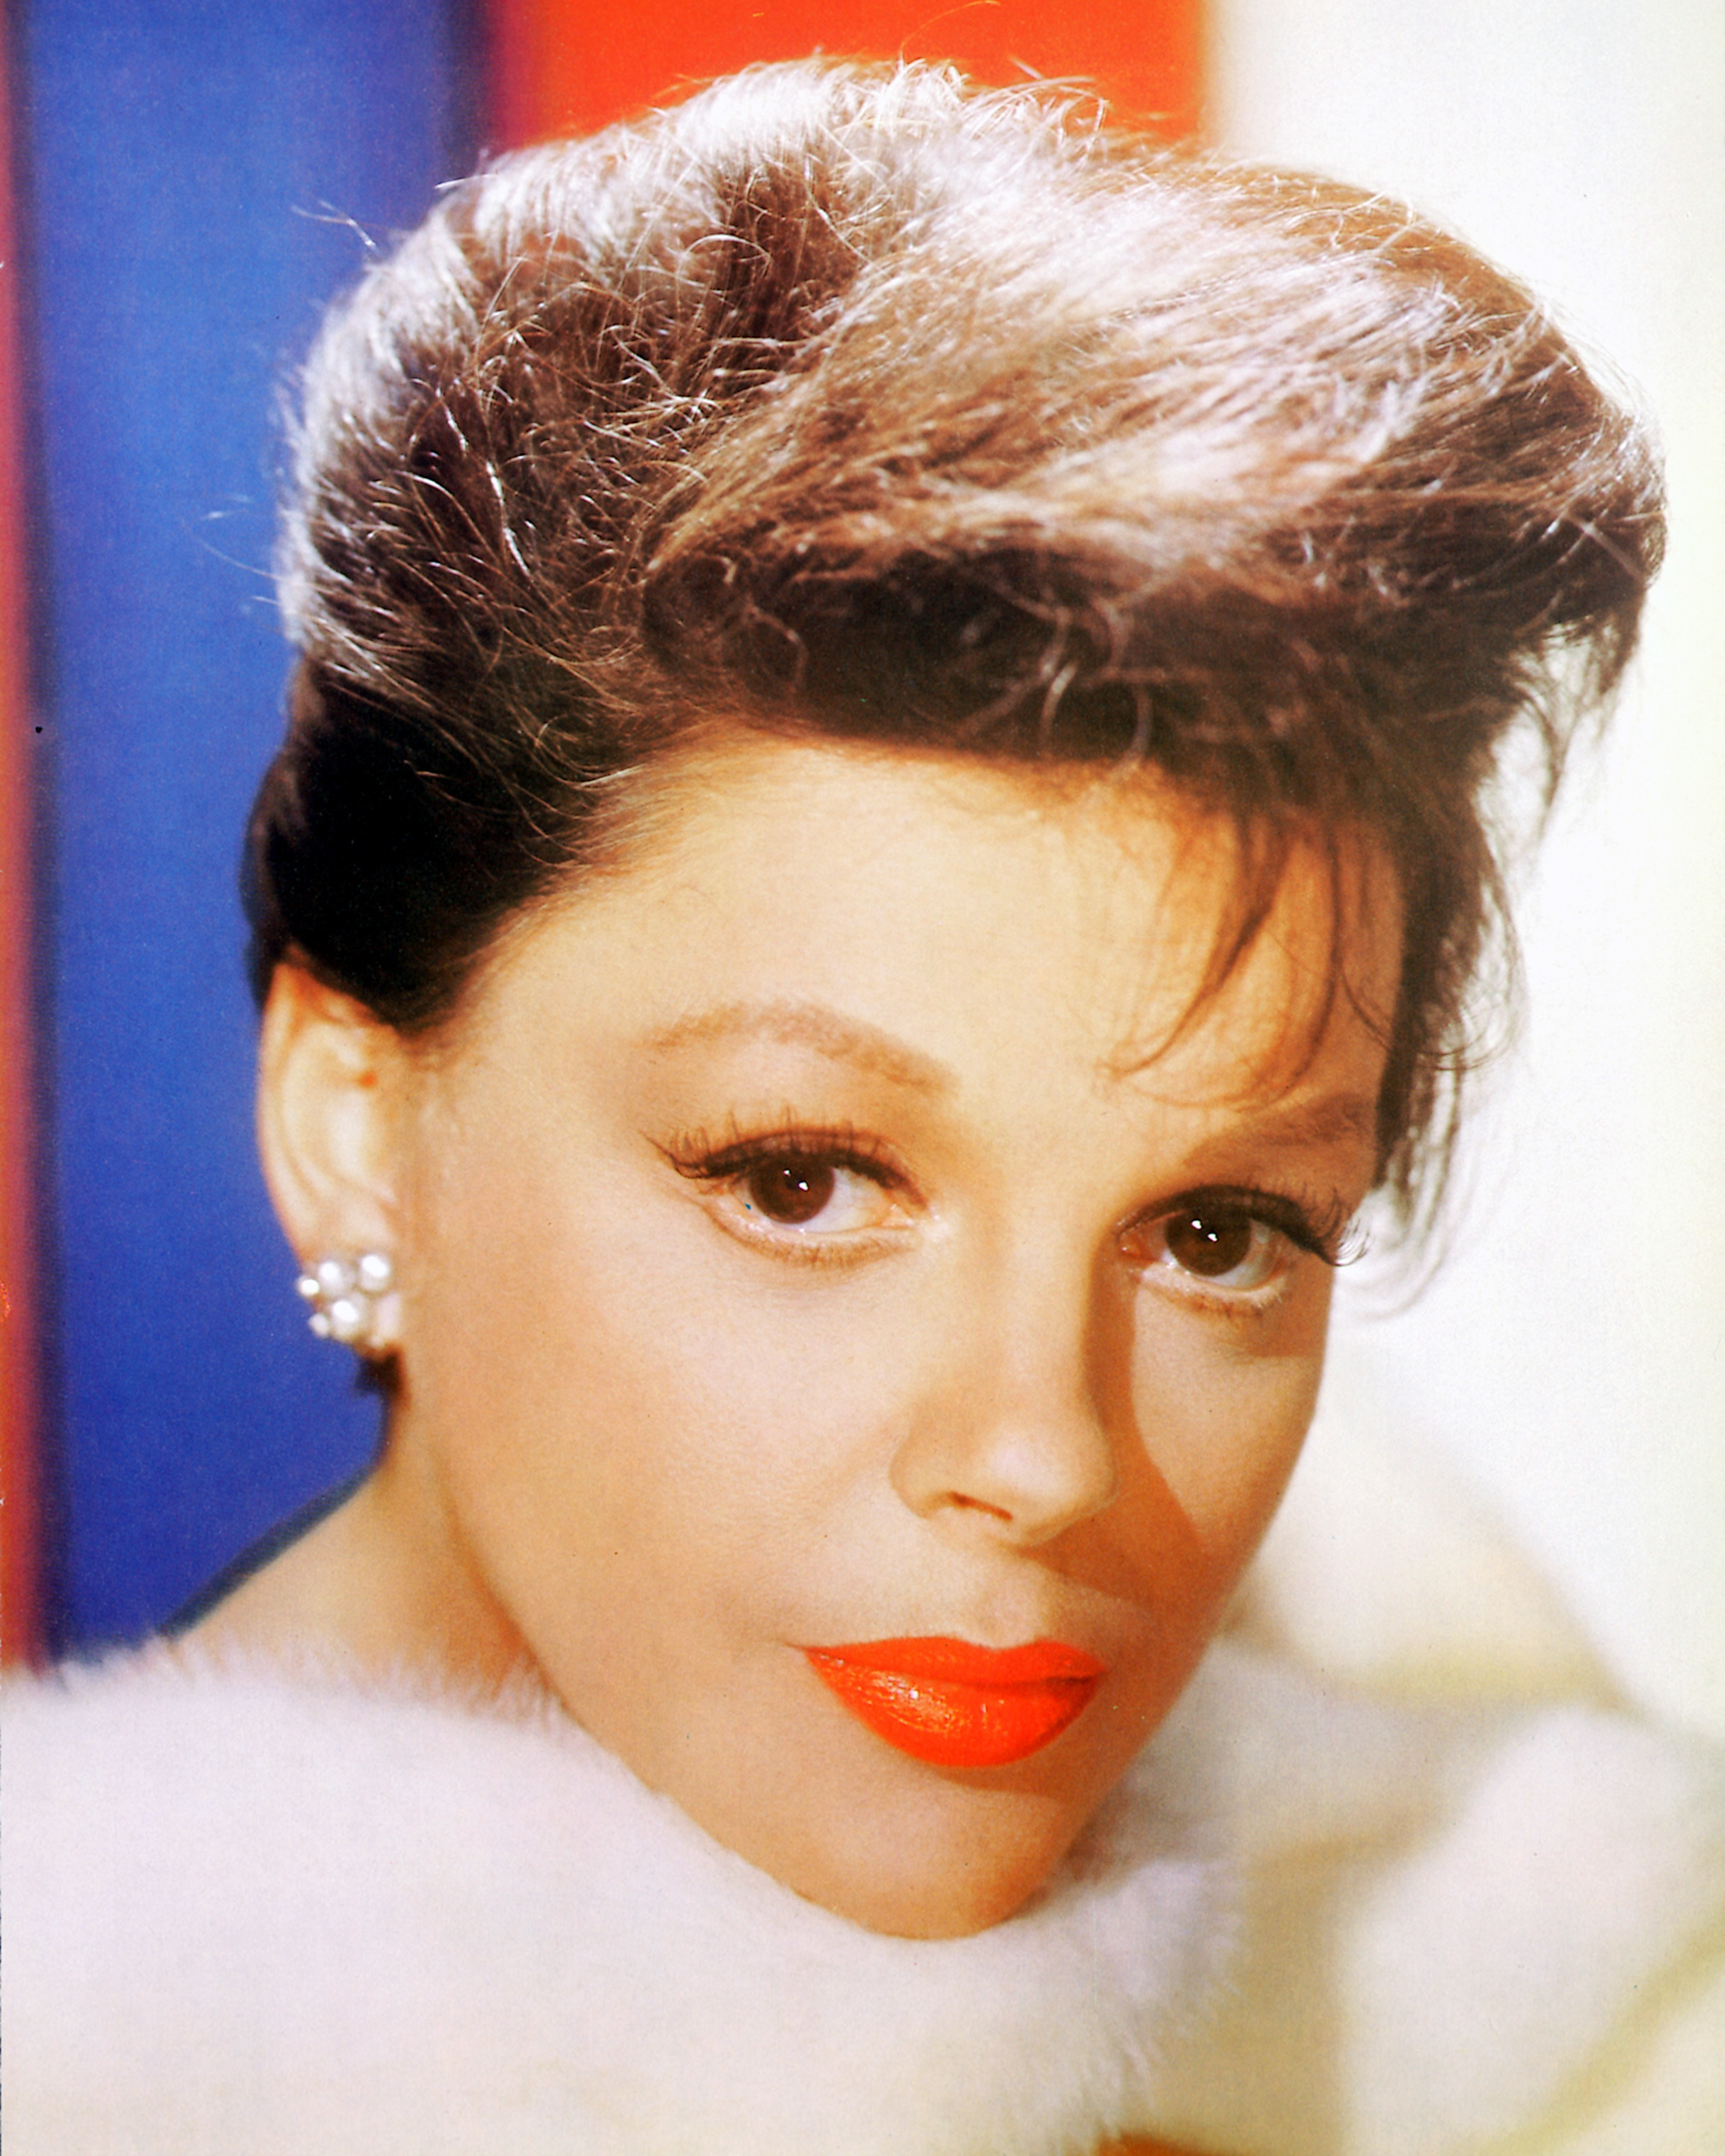 Judy Garland earns first Billboard top 10 since 1945 - ICYMI: The week in music news for Dec. 15 ...